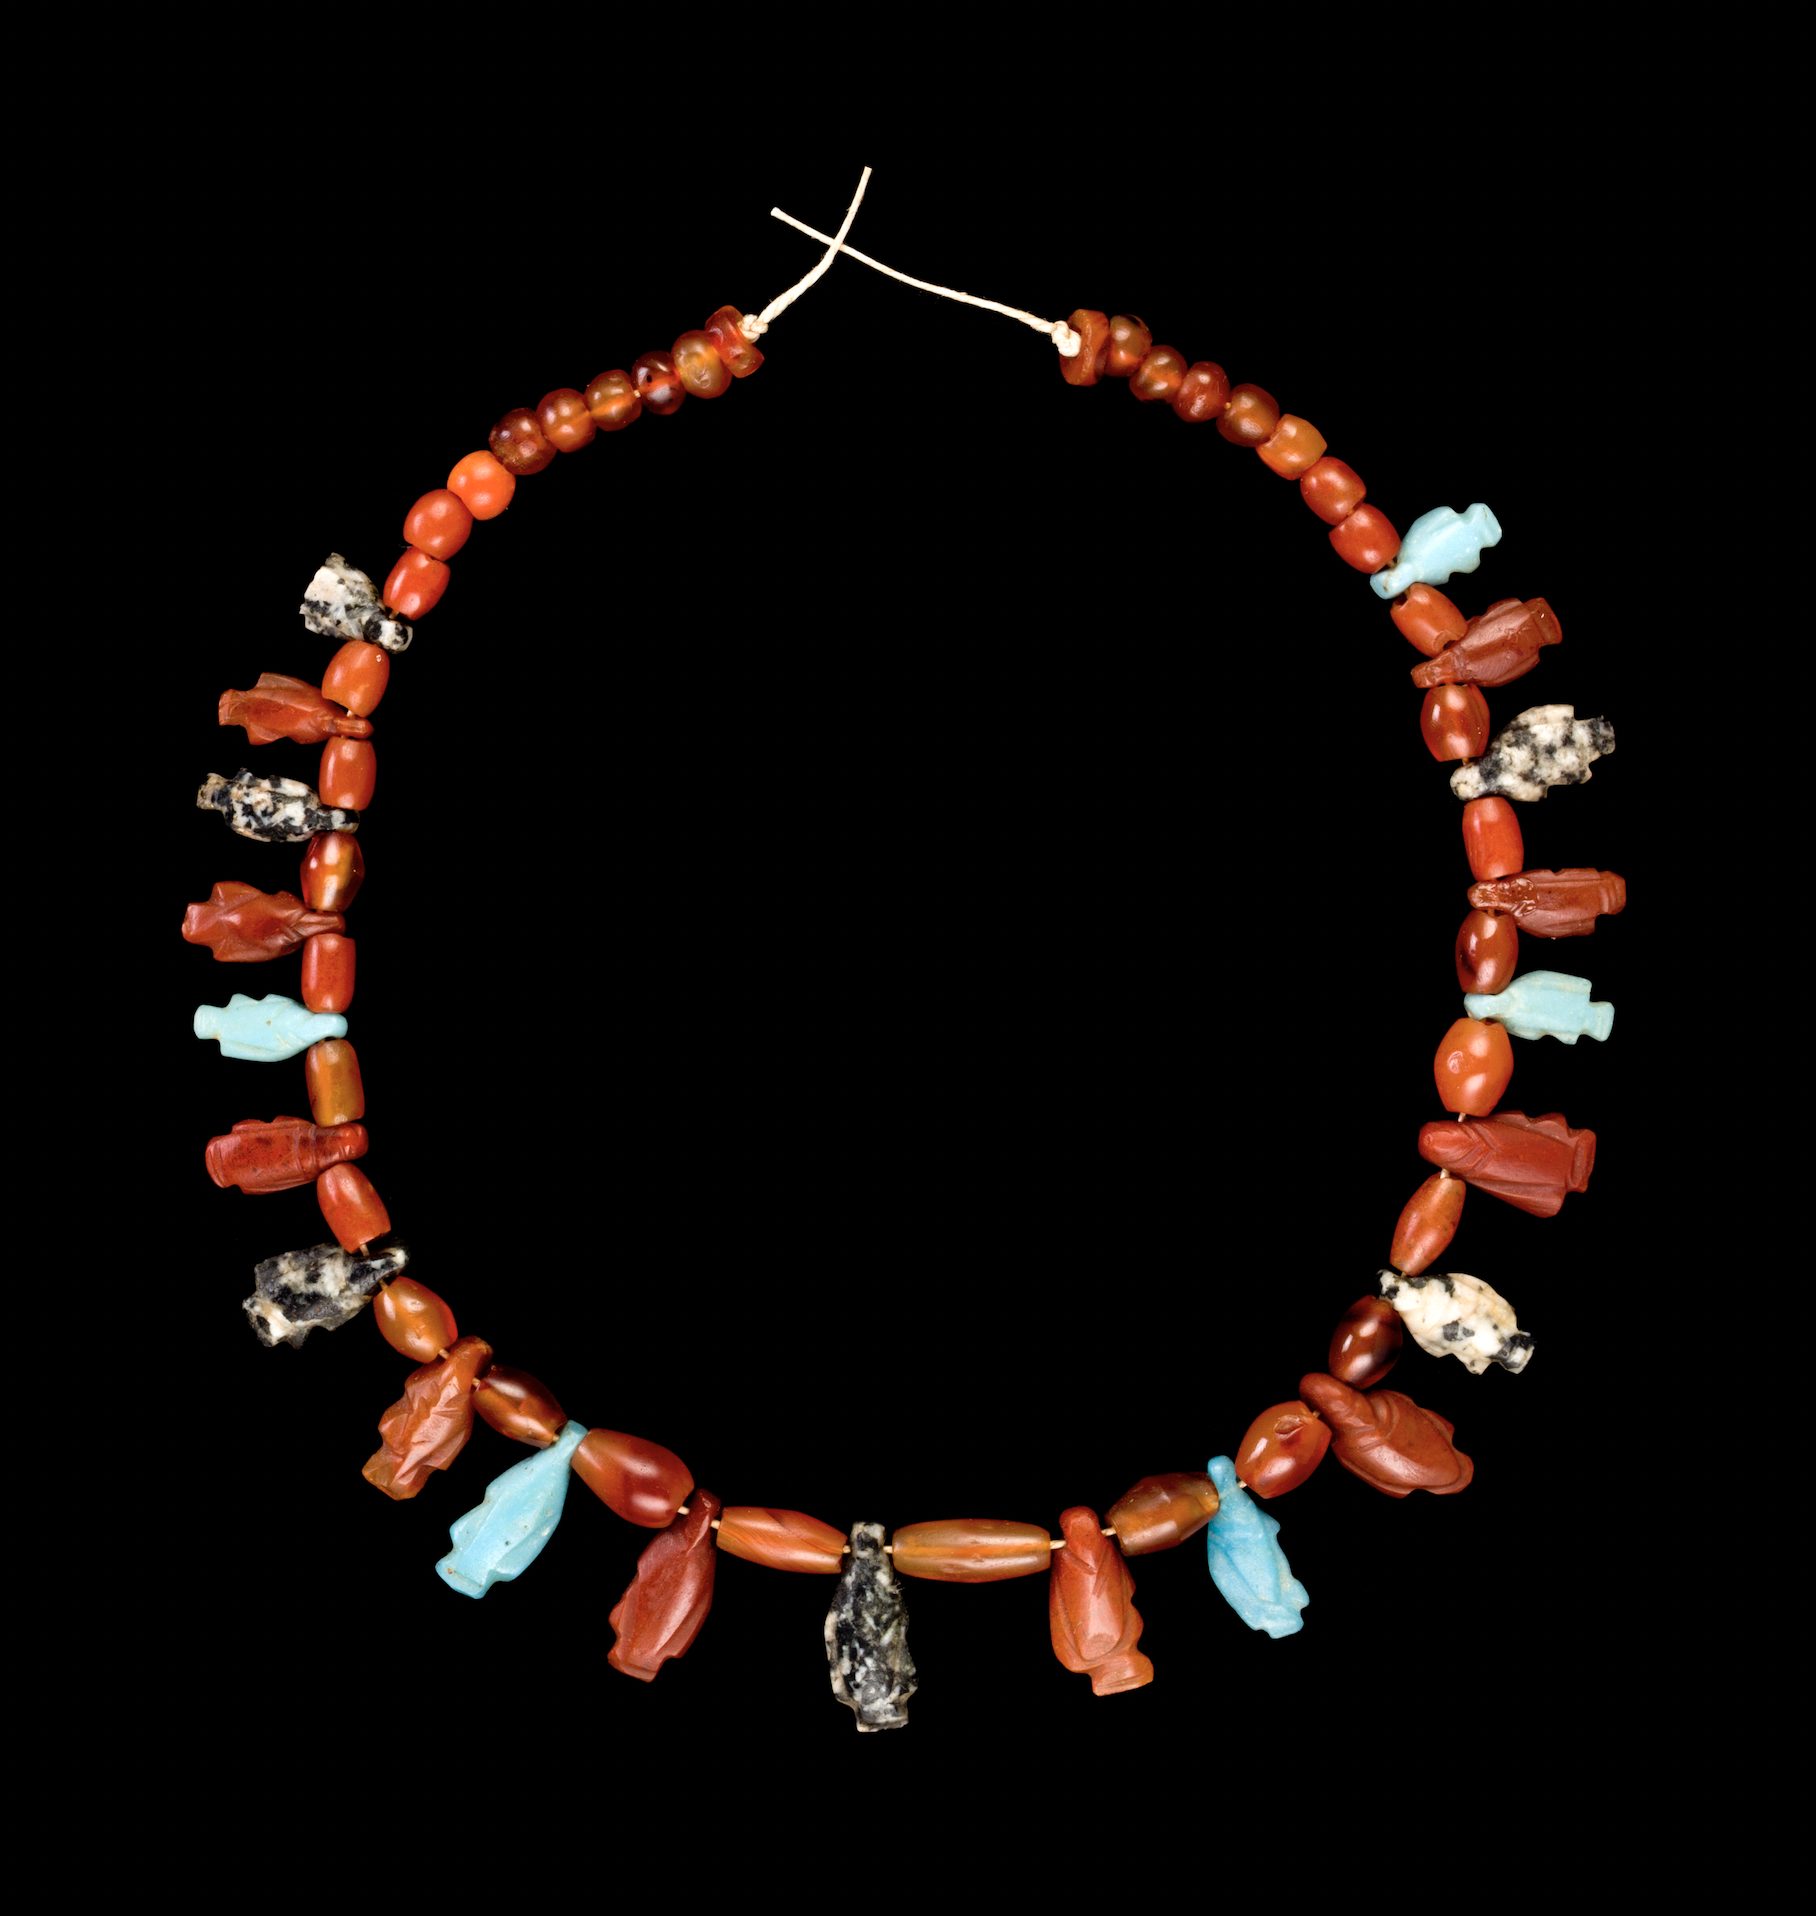 Necklace with fish pendants, ancient Egyptian, New Kingdom, about 1539–1077 B.C., carnelian, various hardstones, and glass frit. Mrs. Kingsmill Marrs Collection, Worcester Art Museum, 2001.119 